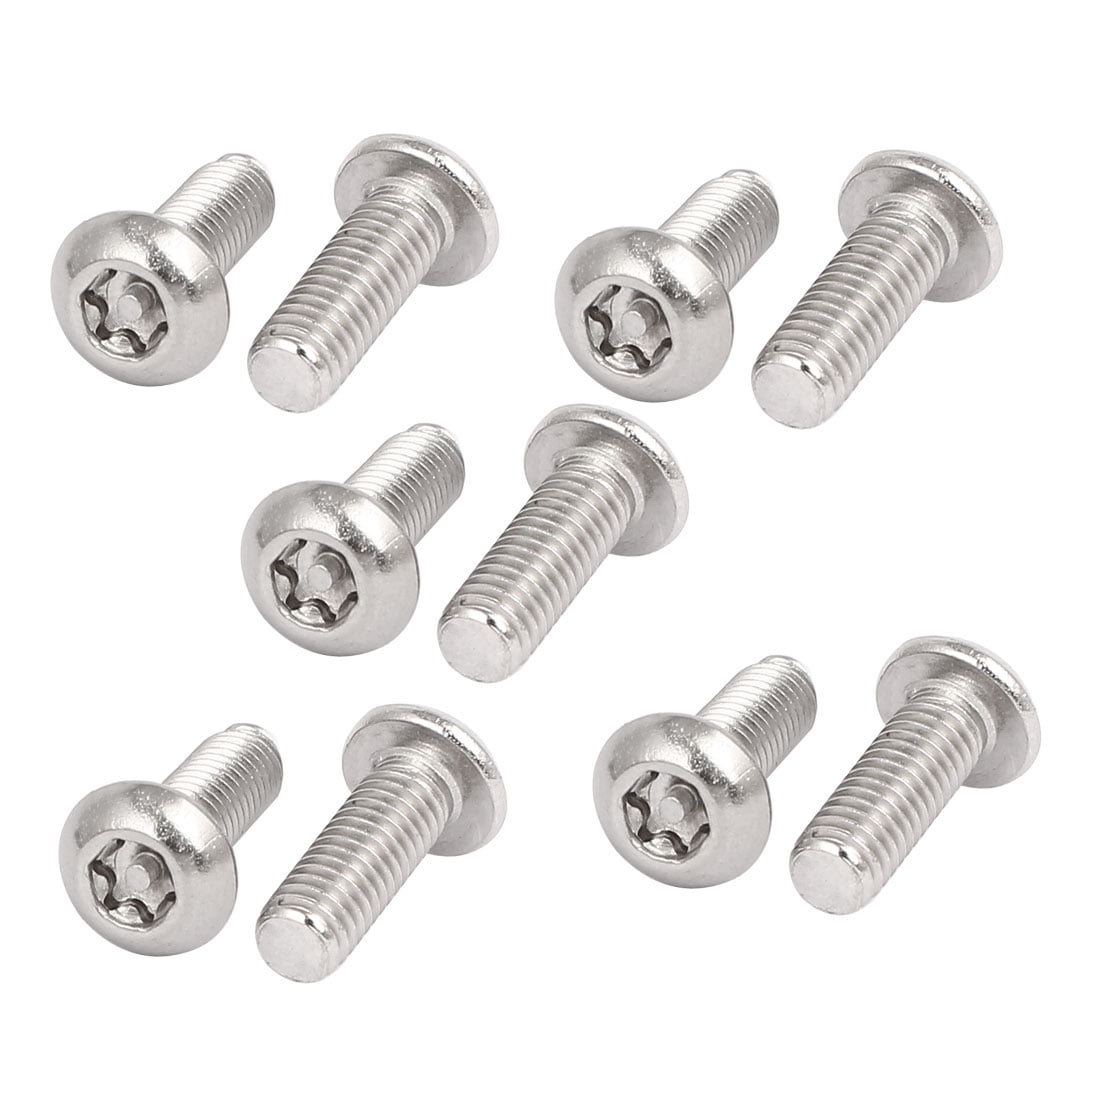 Details about   M5x14mm 304 Stainless Steel Button Head Torx Security Tamper Proof Screws 30pcs 